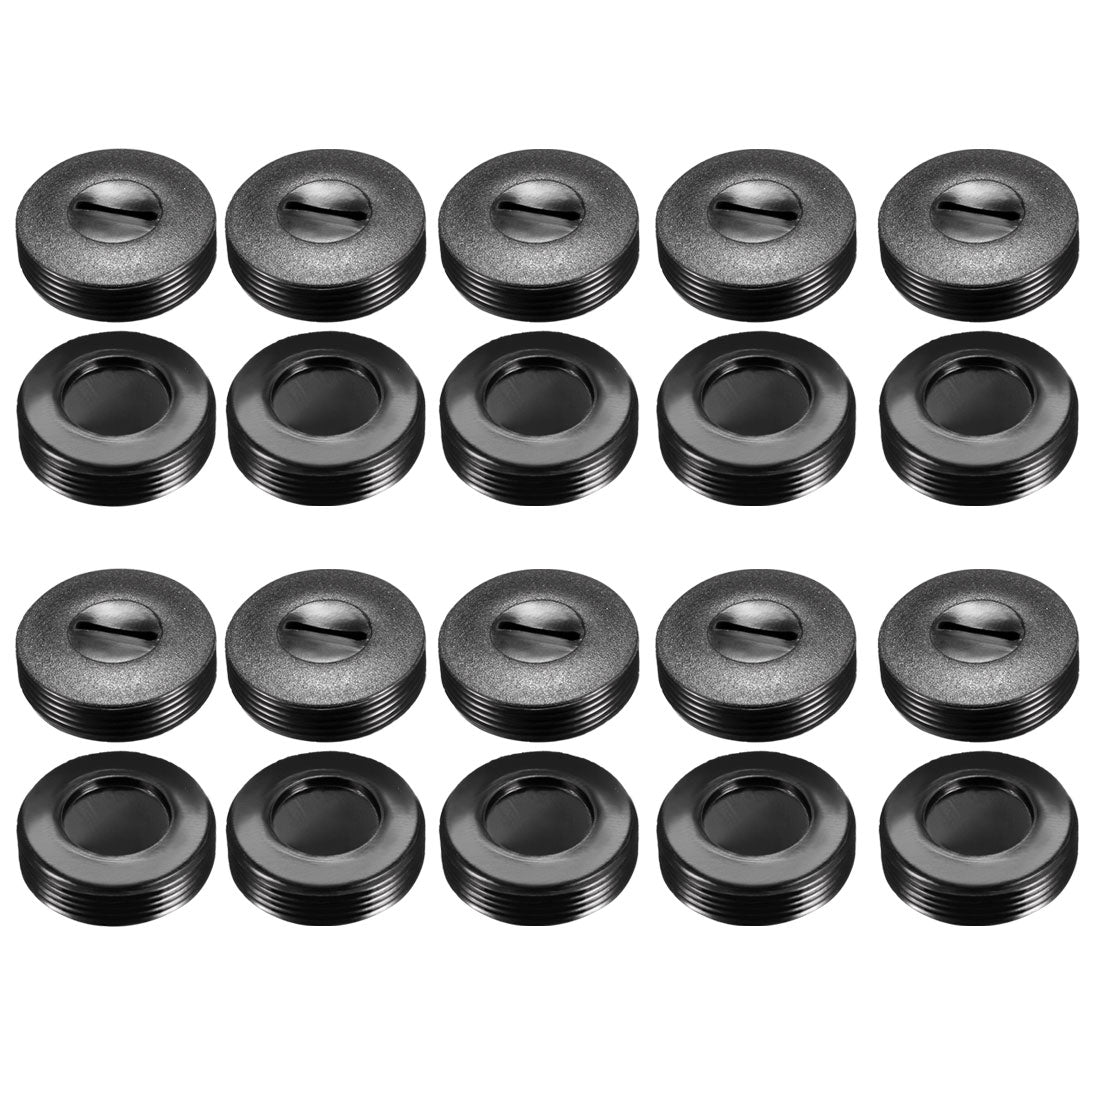 uxcell Uxcell Carbon Brush Holder Caps 22mm O.D. 11.5mm I.D. 6.5mm Thickness Motor Brush Cover Plastic Fitting Thread Black 20pcs